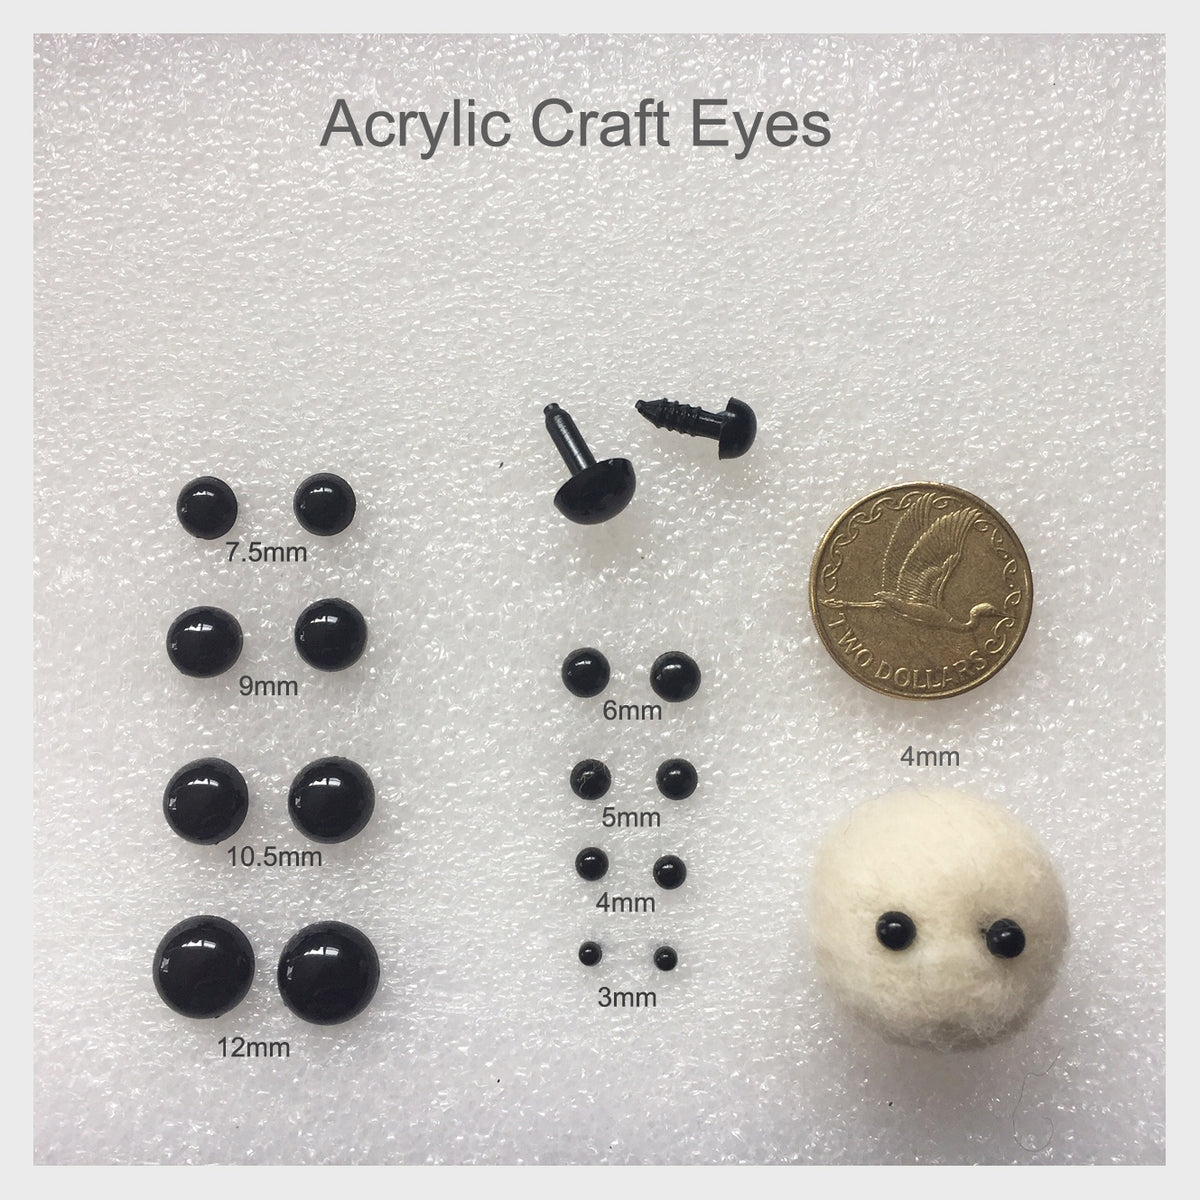 6mm Safety Eyes in Black - 5 Pairs